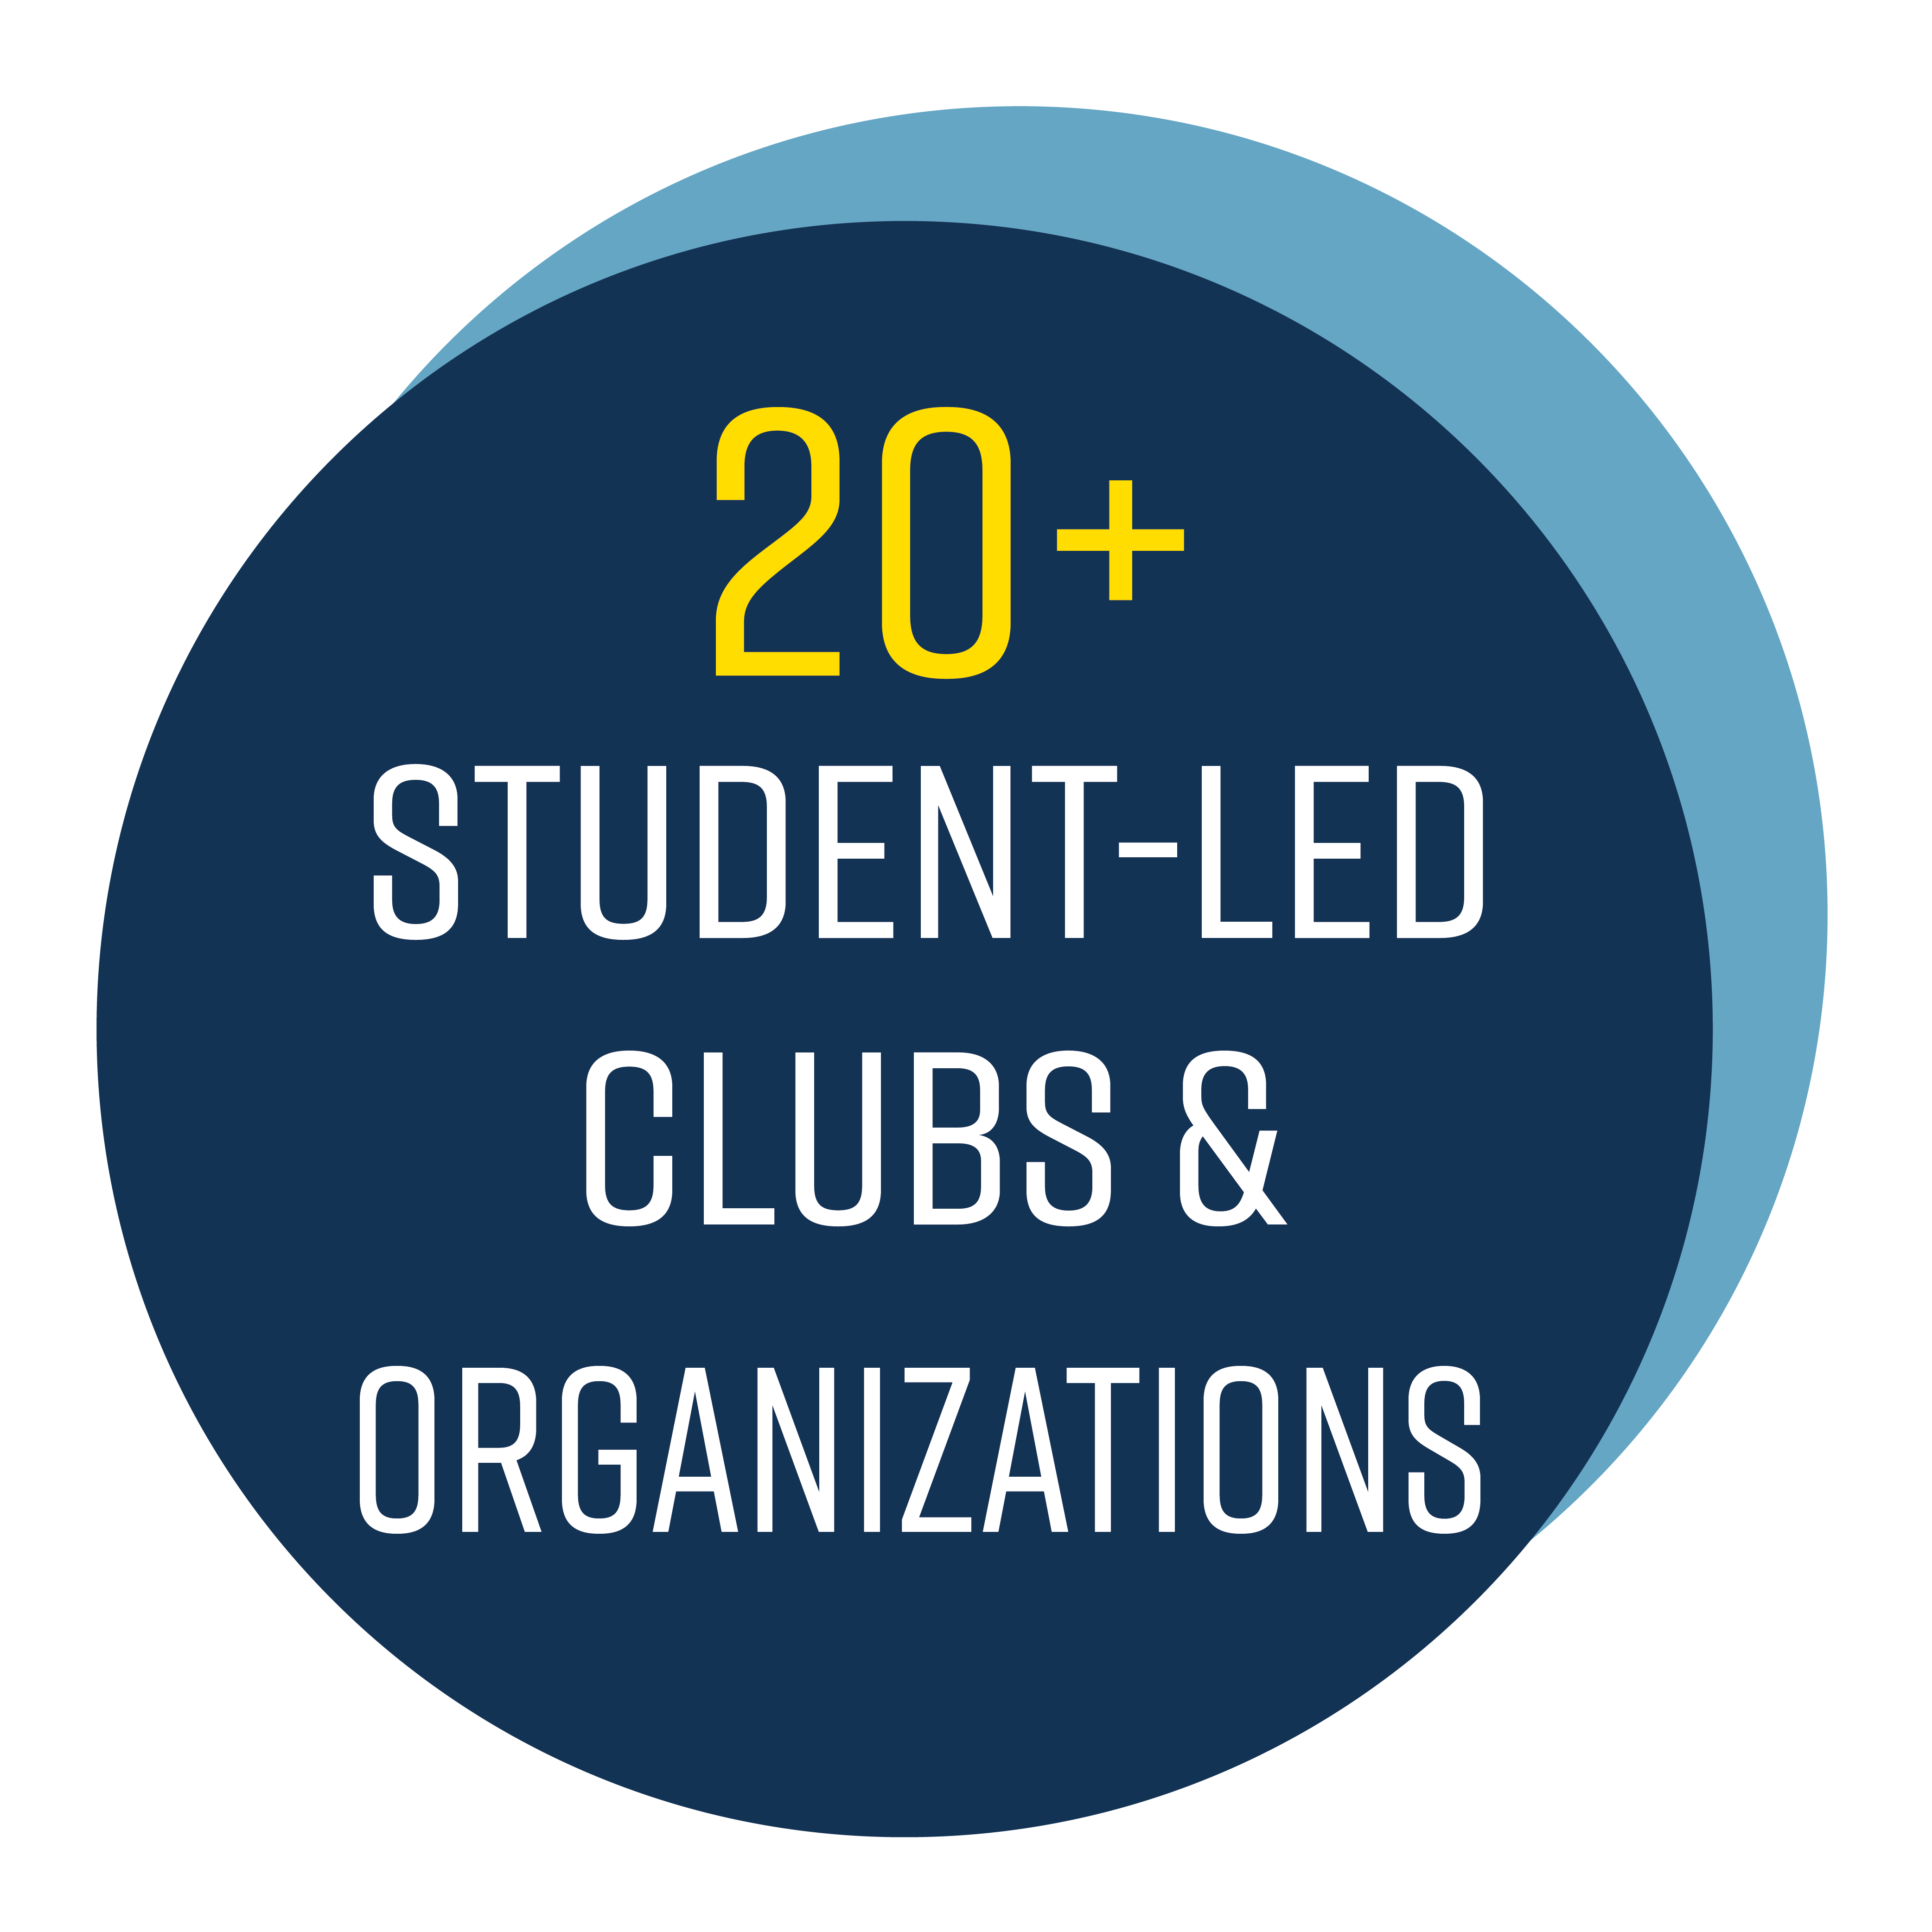 Student Clubs